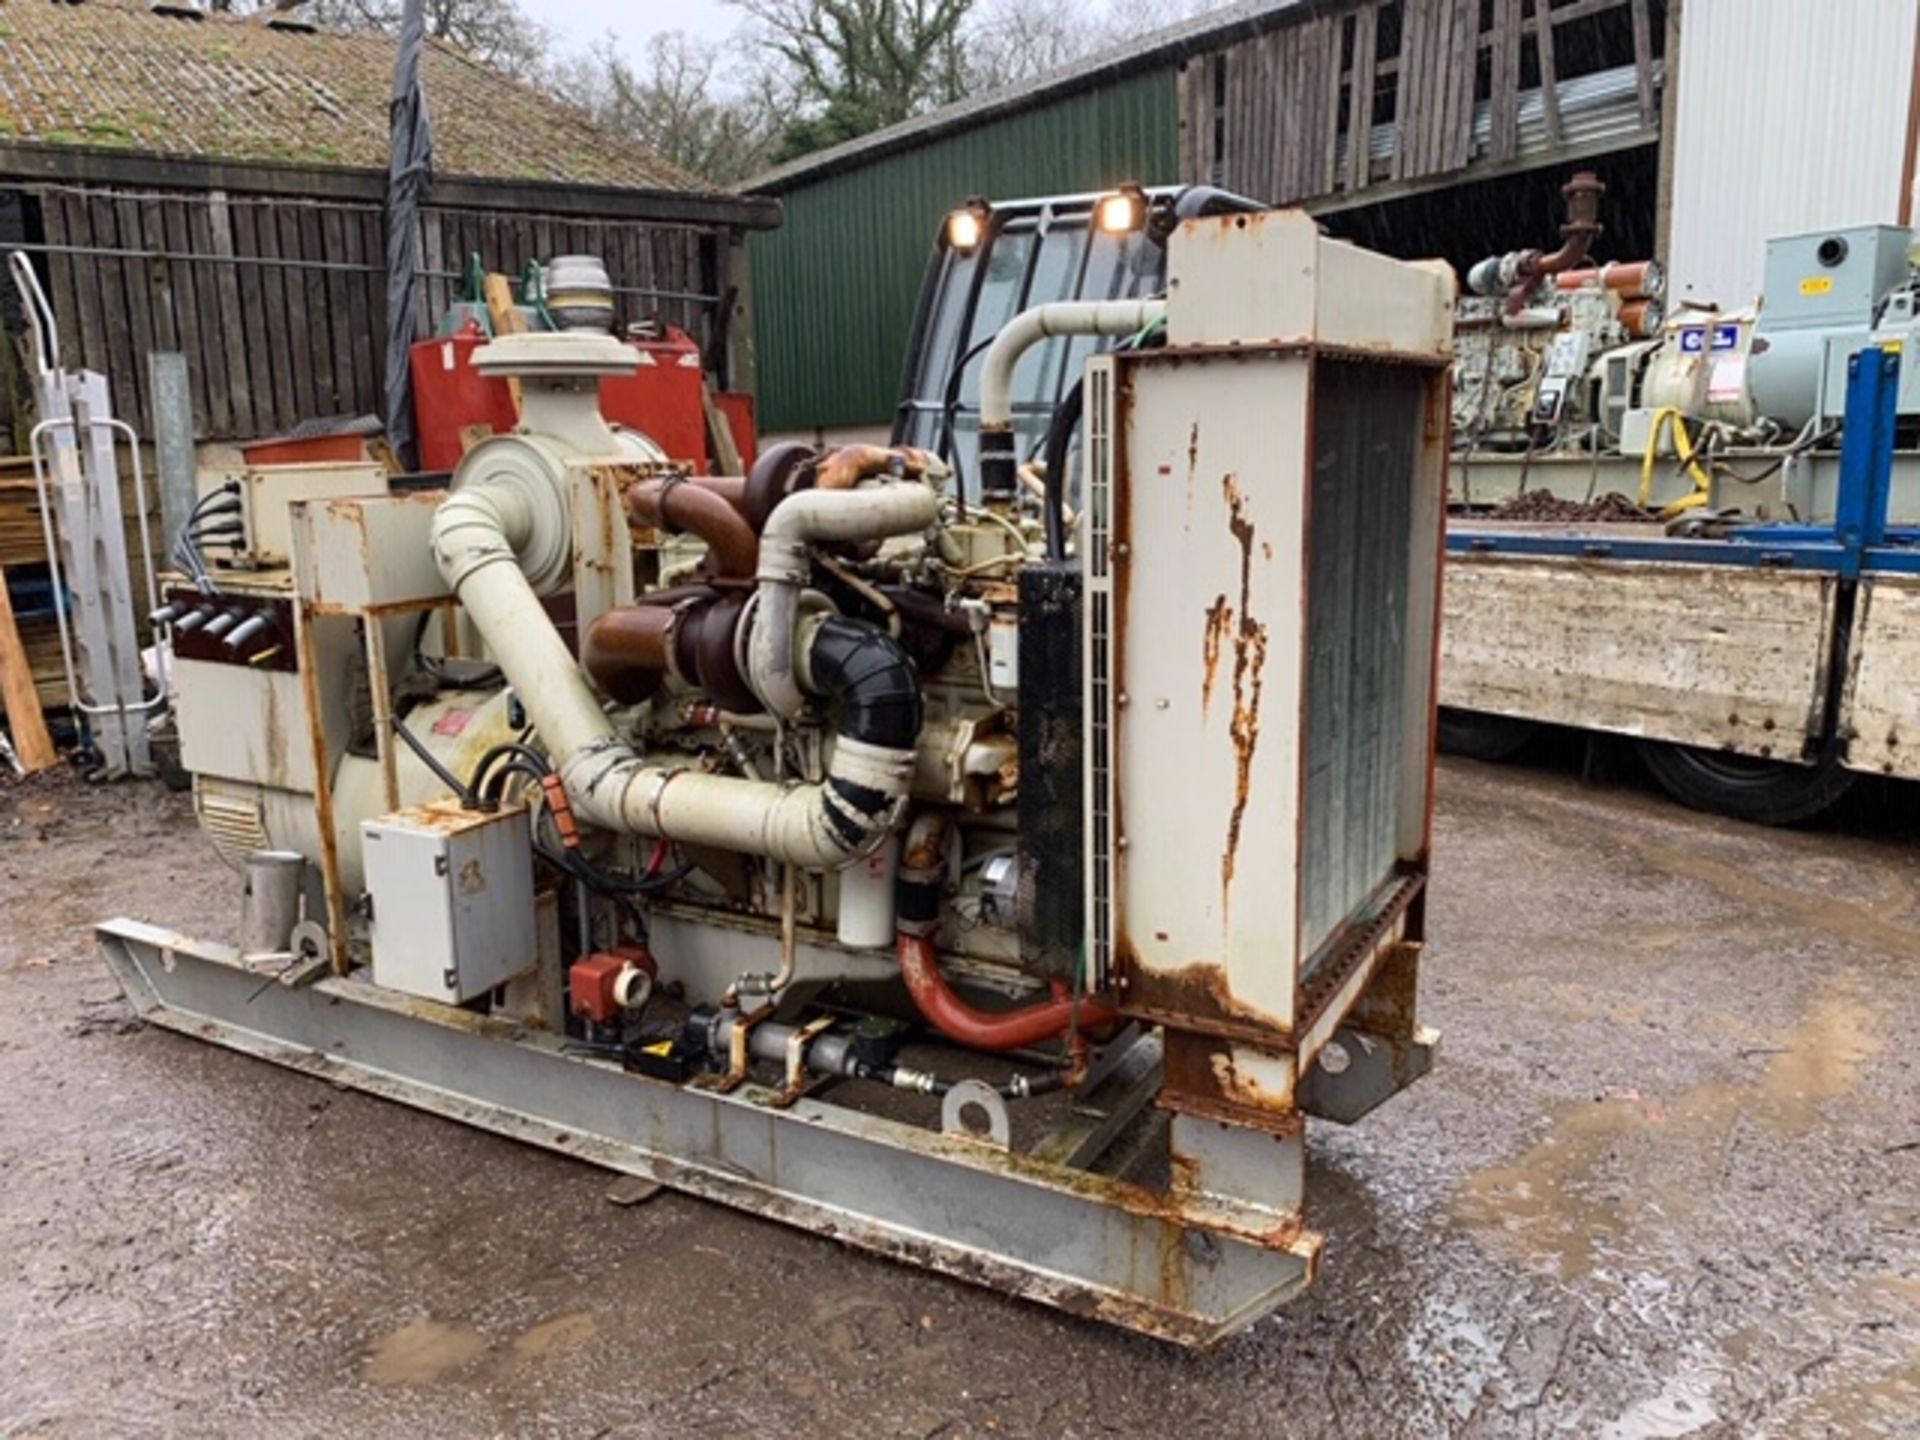 CUMMINS ENGINED 350KVA GENERATOR, EX AIRPORT STANDBY USE, HOURS WILL BE LOW, ALTHOUGH UNKNOWN.